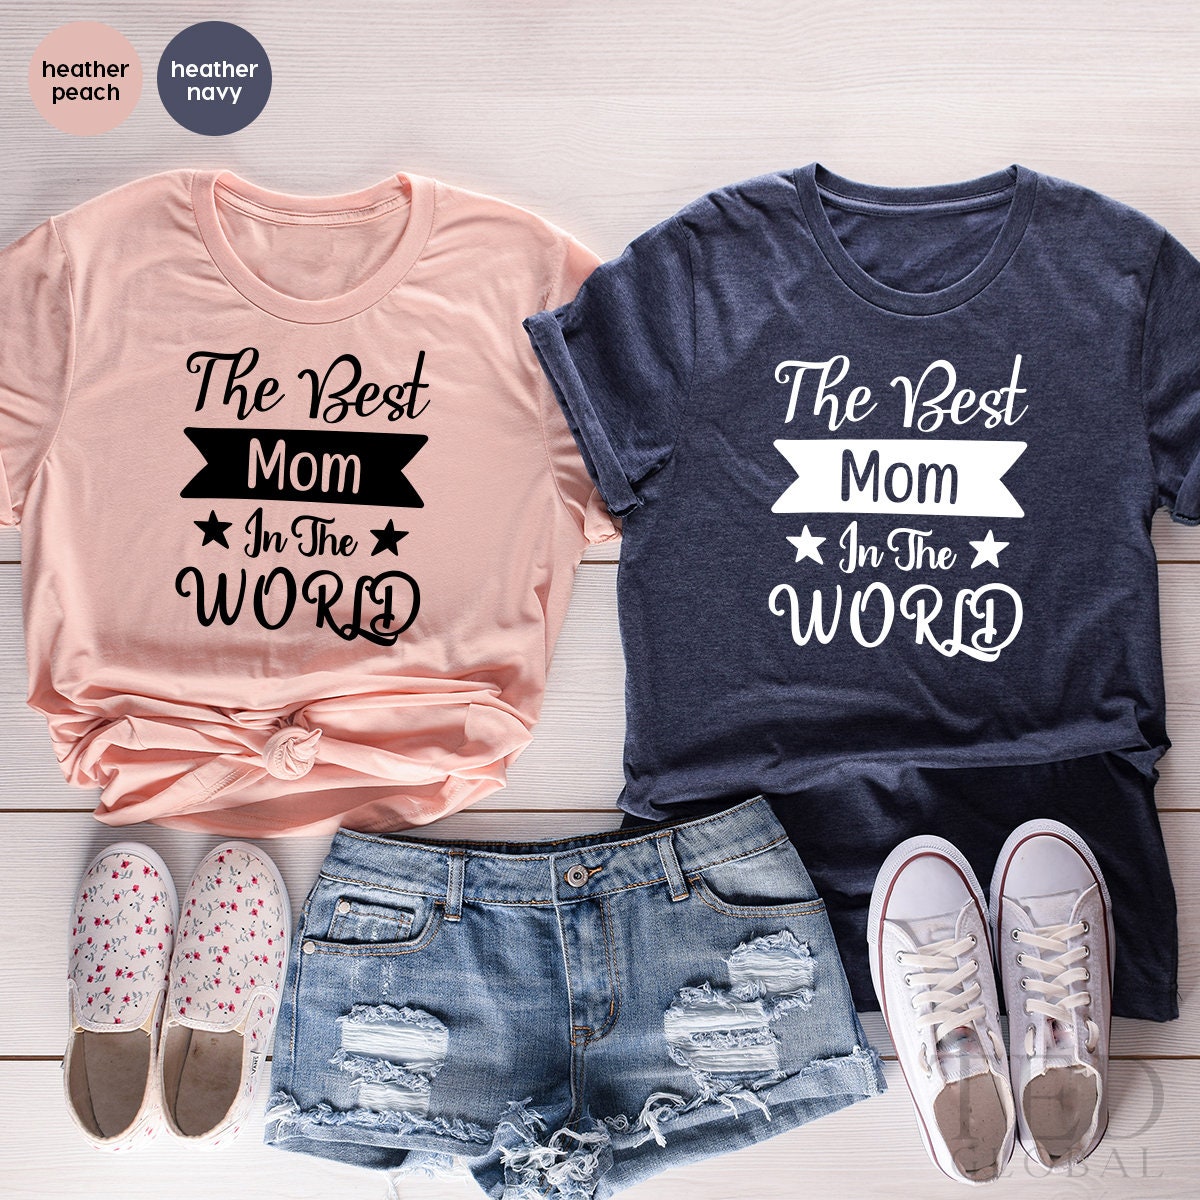 Best Mom T-Shirt, Cool Mama T Shirt, Mothers Day Gifts, Mommy TShirt, Best Mom In The World Shirt, New Mom Gift, Cute Mama T Shirt - Fastdeliverytees.com